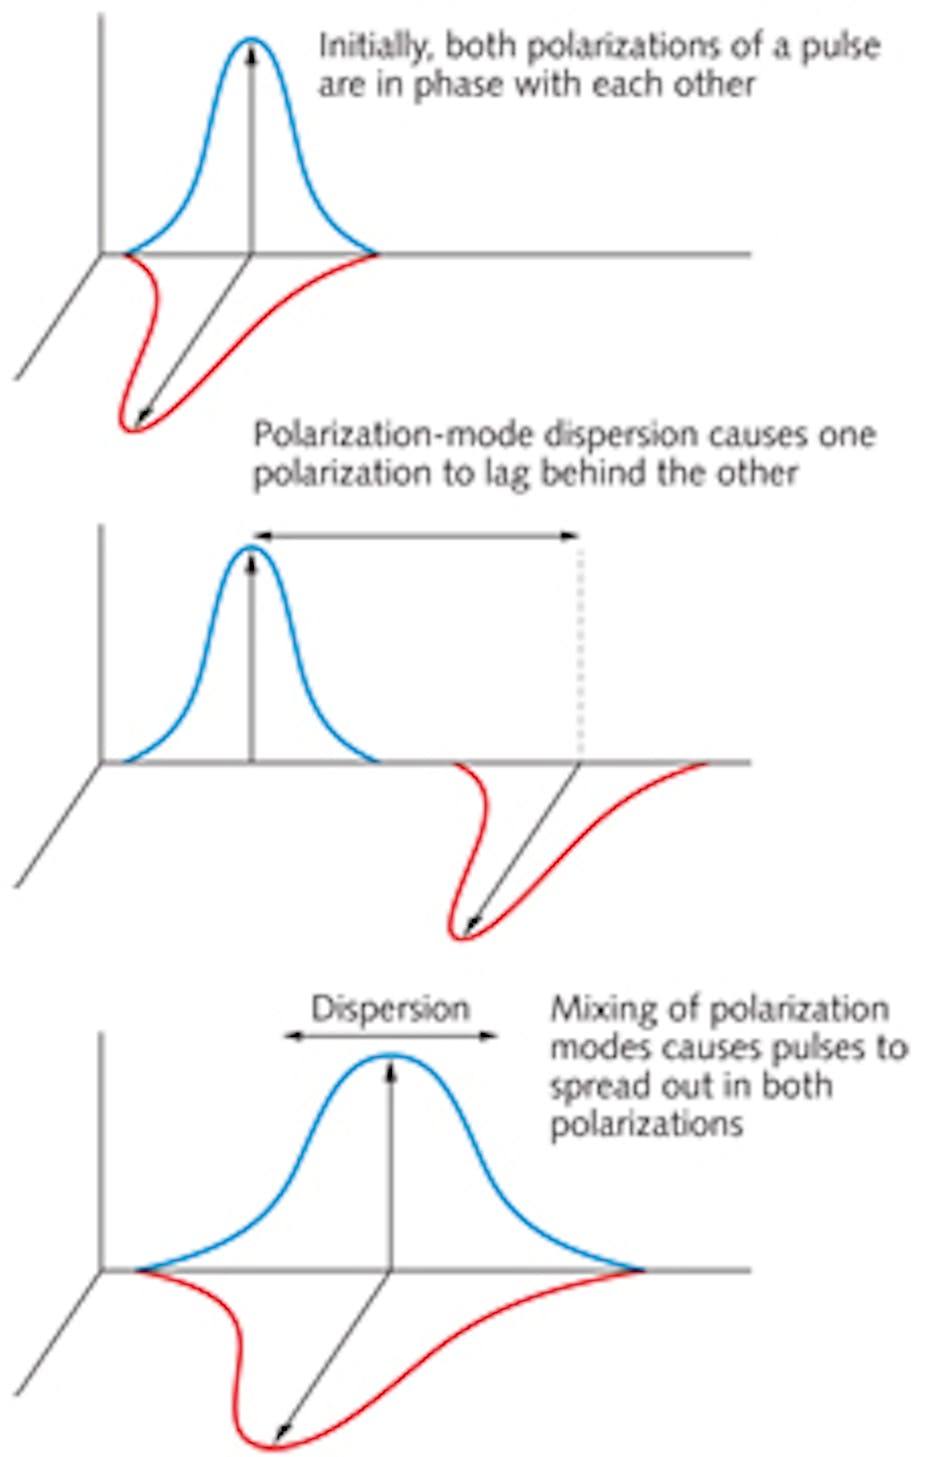 FIGURE 1. Small amounts of birefringence in a fiber add up to produce a small phase shift between orthogonal polarizations in a fiber, which varies over time. Episodes of high polarization-mode dispersion (PMD) can cause service outages. (From Jeff Hecht, Understanding Fiber Optics, Pearson/Prentice-Hall)